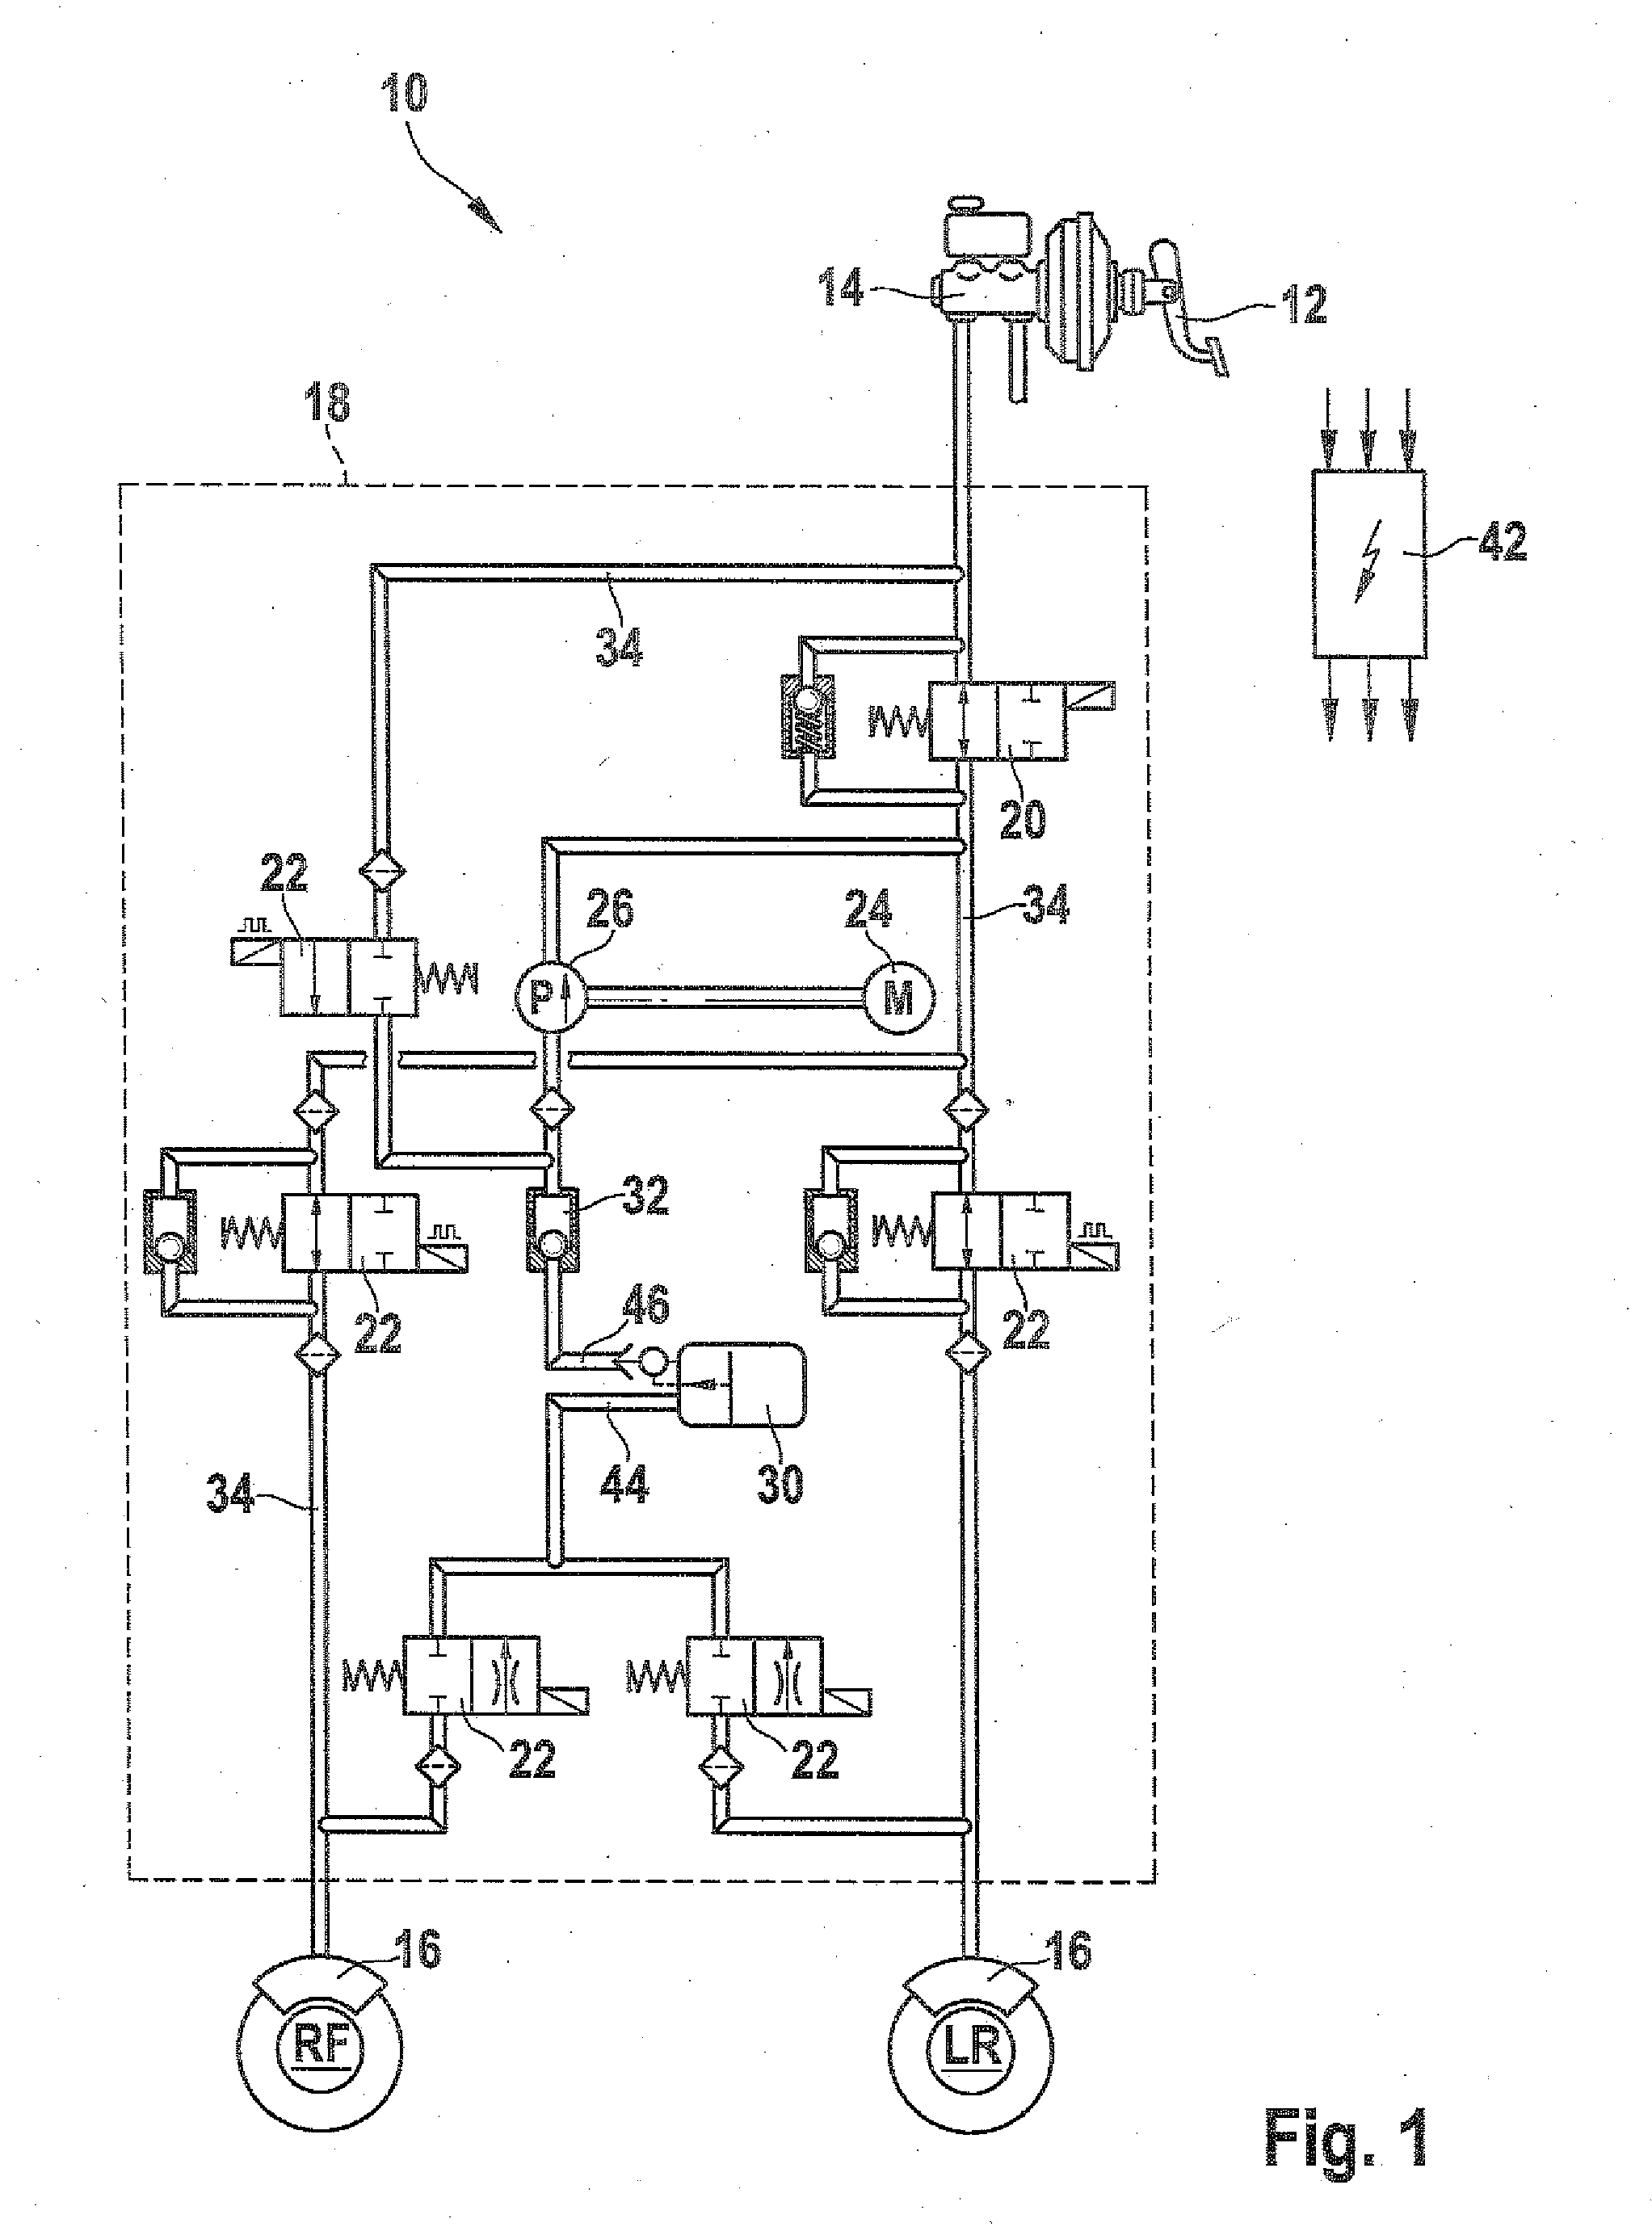 Hydraulic vehicle brake system having a service brake which can be actuated by muscle force and having a device for regulating the wheel slip